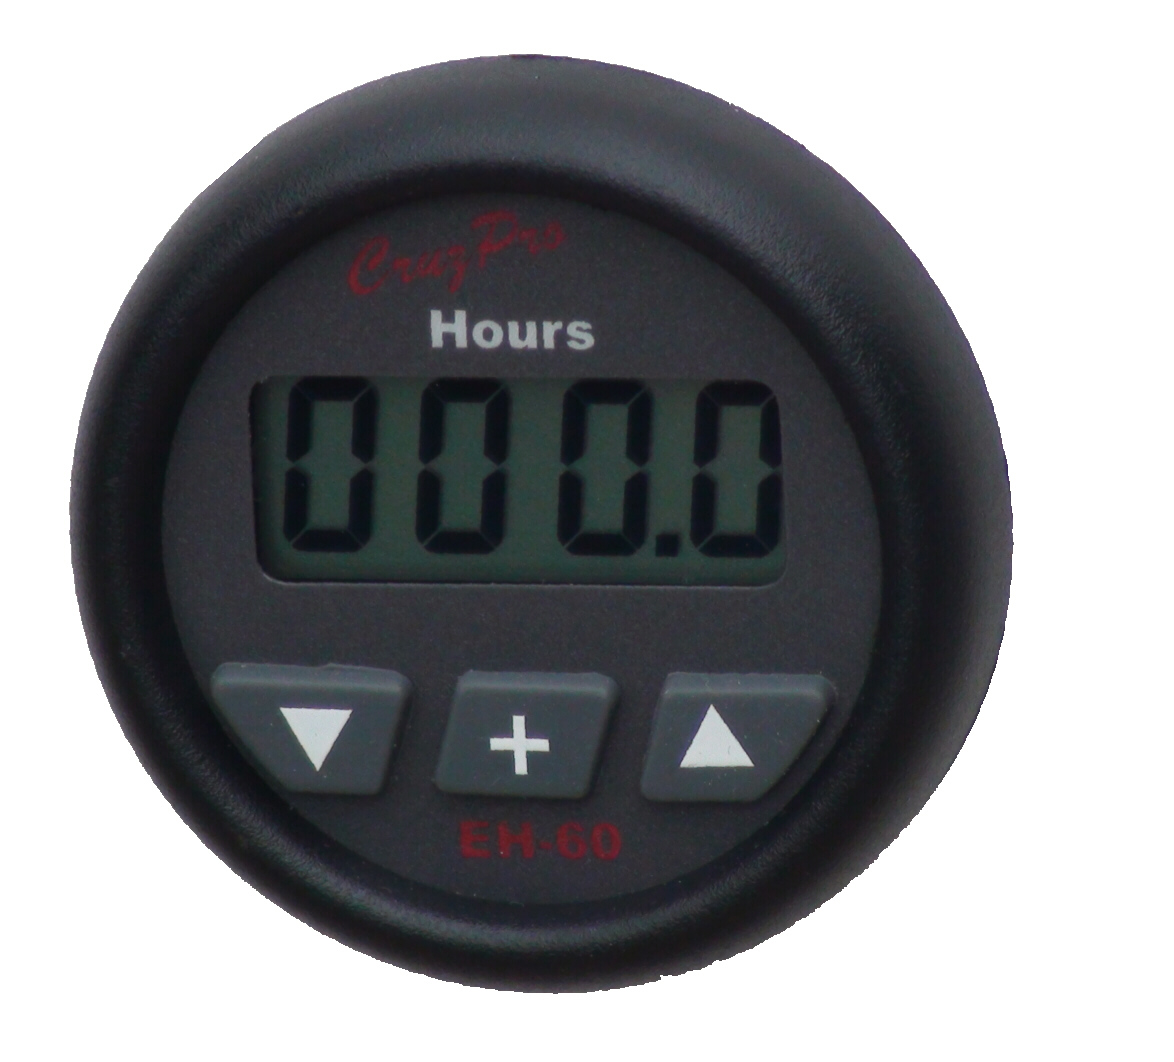 EH60 Digital Engine Hours and Elapsed Time Gauge with Maintenance Alarm